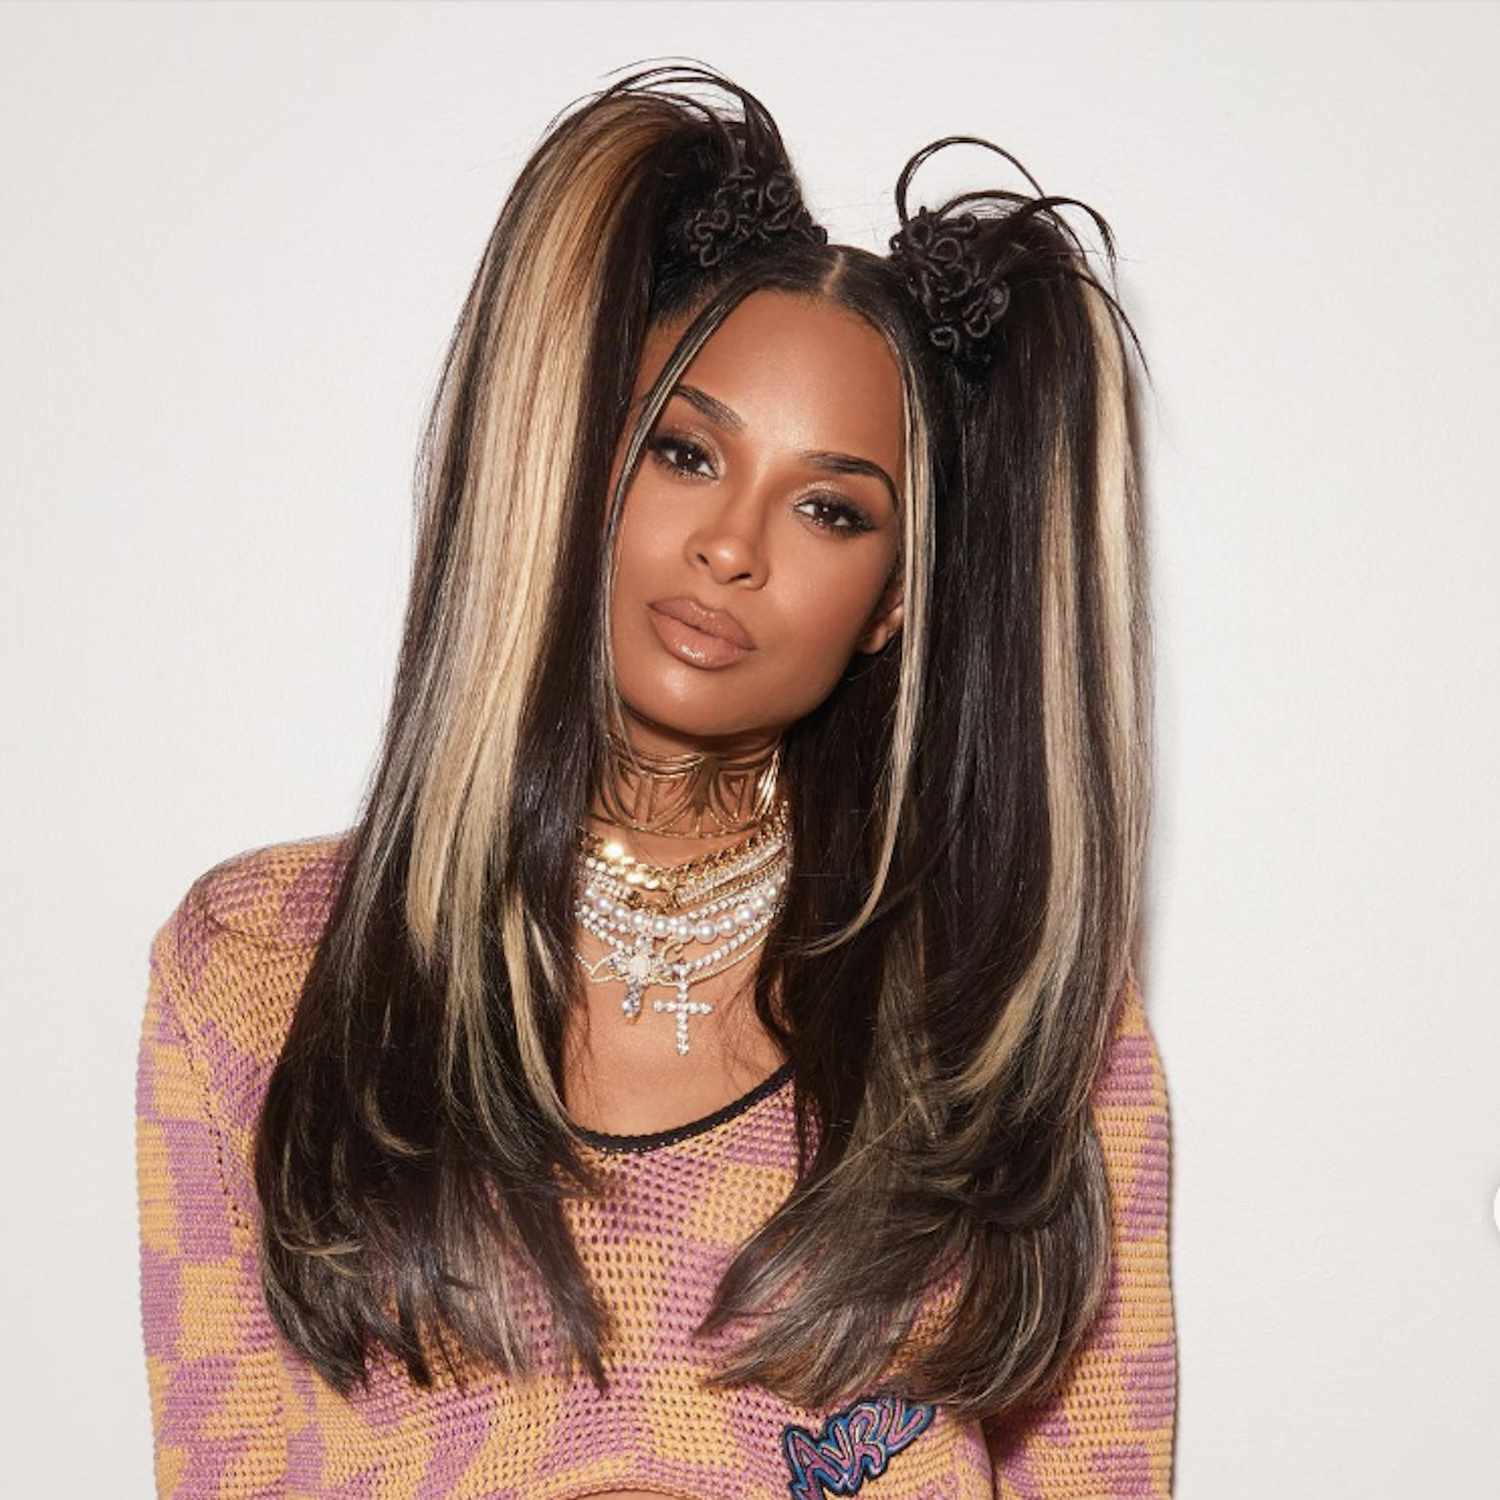 Ciara wears high pigtails with blonde streaks and stylized bases